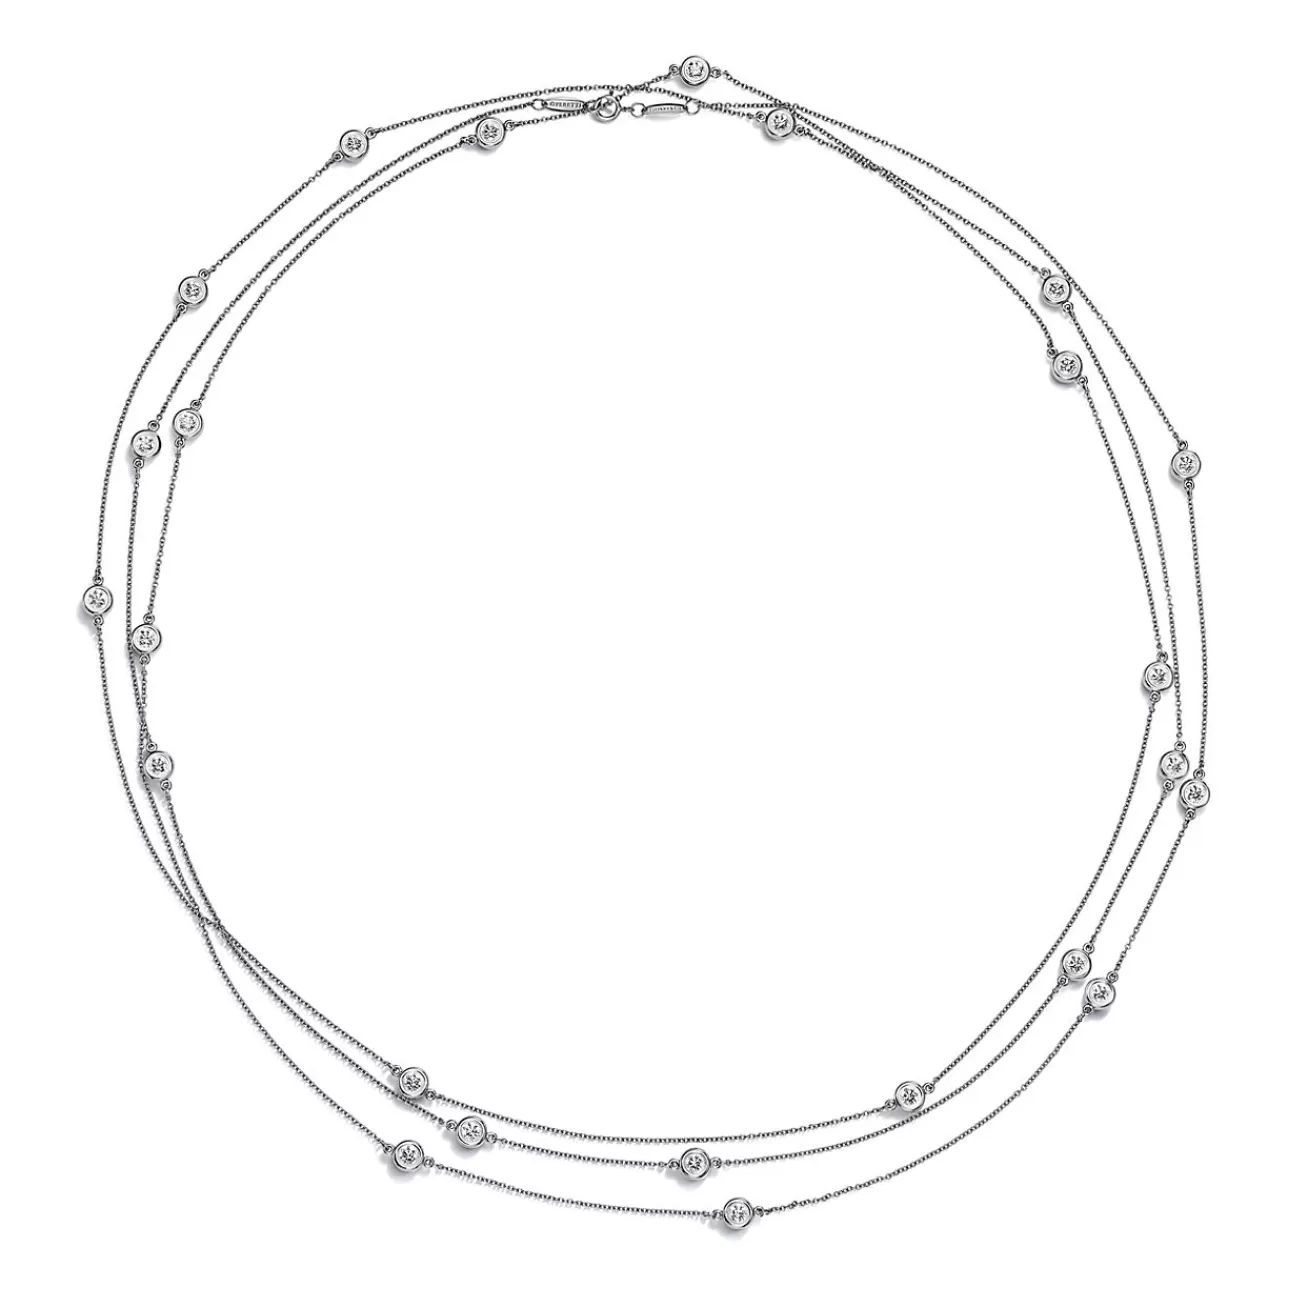 Tiffany & Co. Elsa Peretti® Diamonds by the Yard® Sprinkle Necklace in Platinum | ^ Necklaces & Pendants | Platinum Jewelry